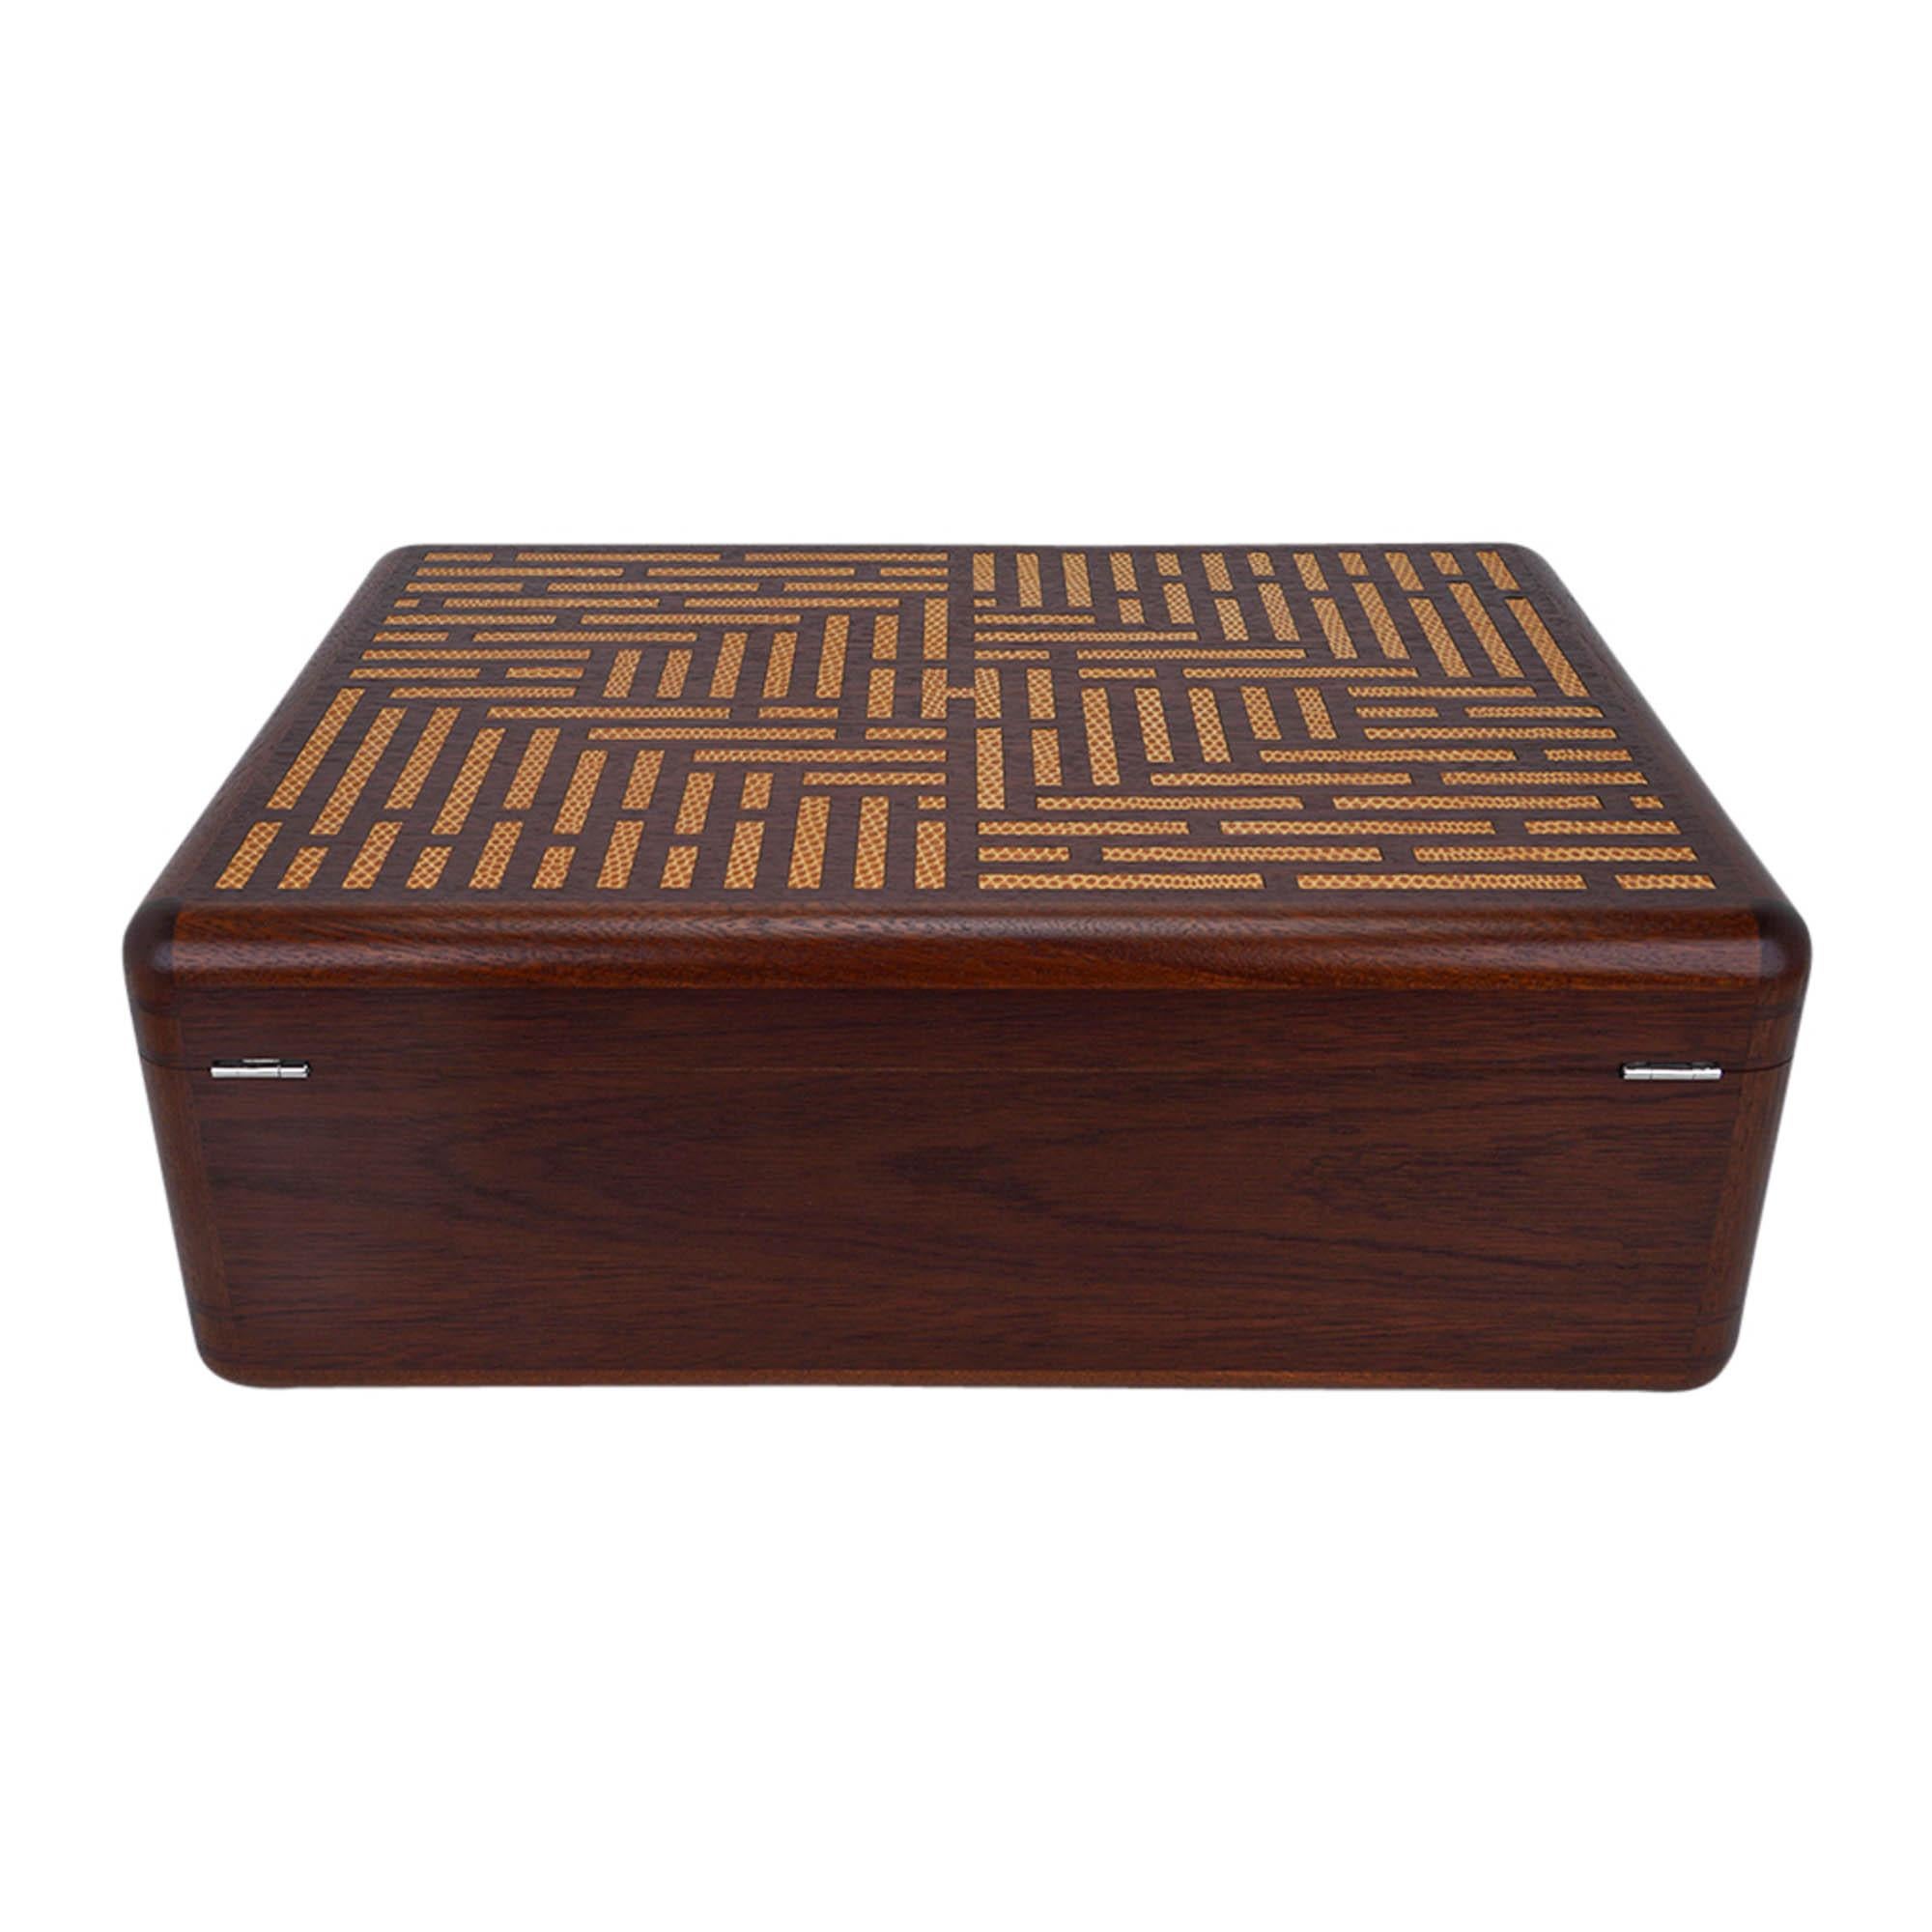 Hermes Coffret a Cigares Humidor Limited Edition Sycamore Holz Sesam Eidechse im Angebot 15